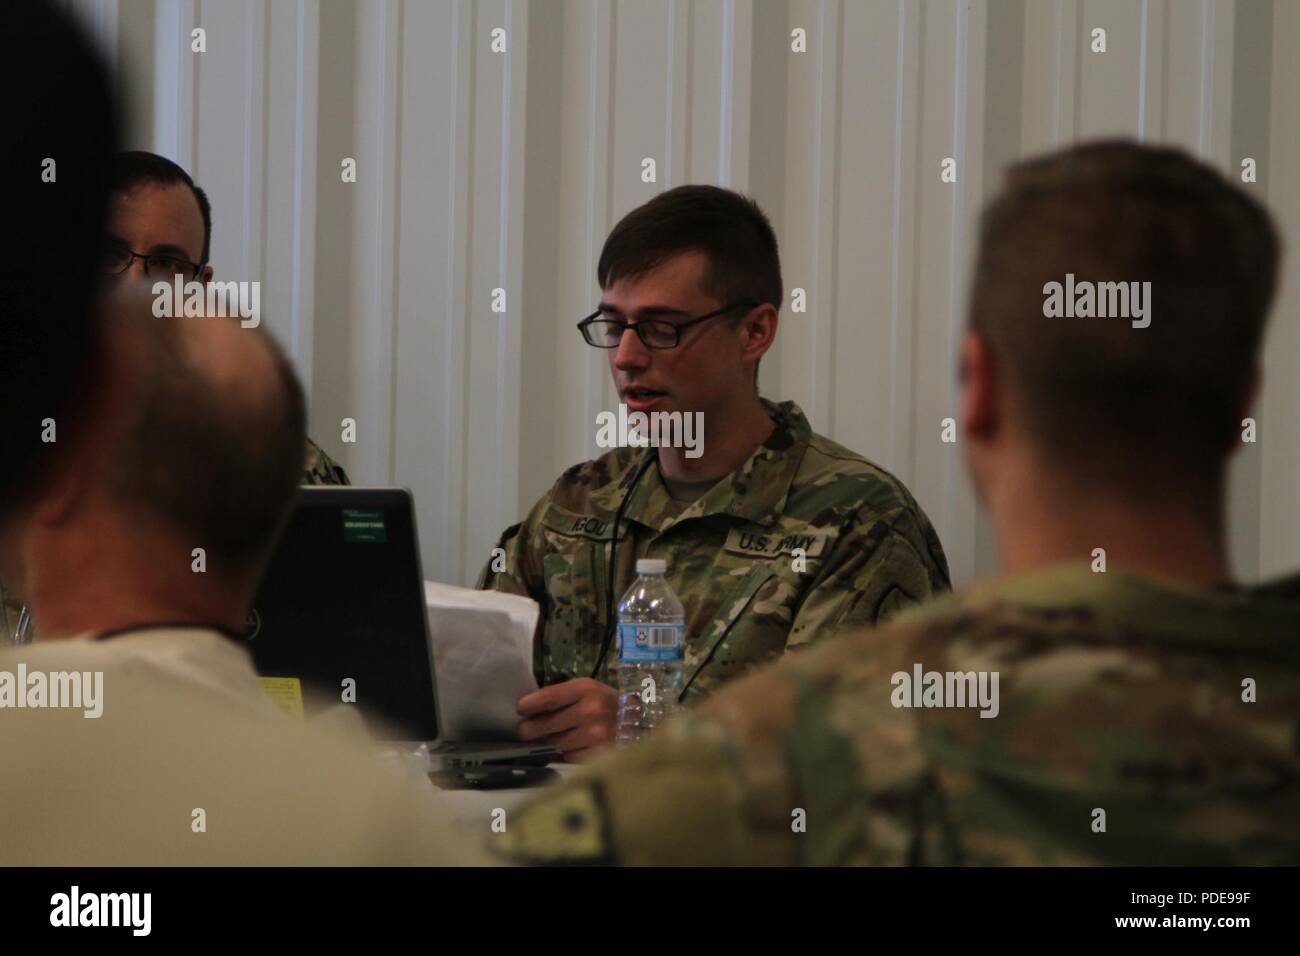 Spc. David Igou, an information technology specialist for the 144th Cyber  Warfare Company out of Fairfax, Va. and an infrastructure consultant at Red  Hat, a software development company based out of Raleigh,